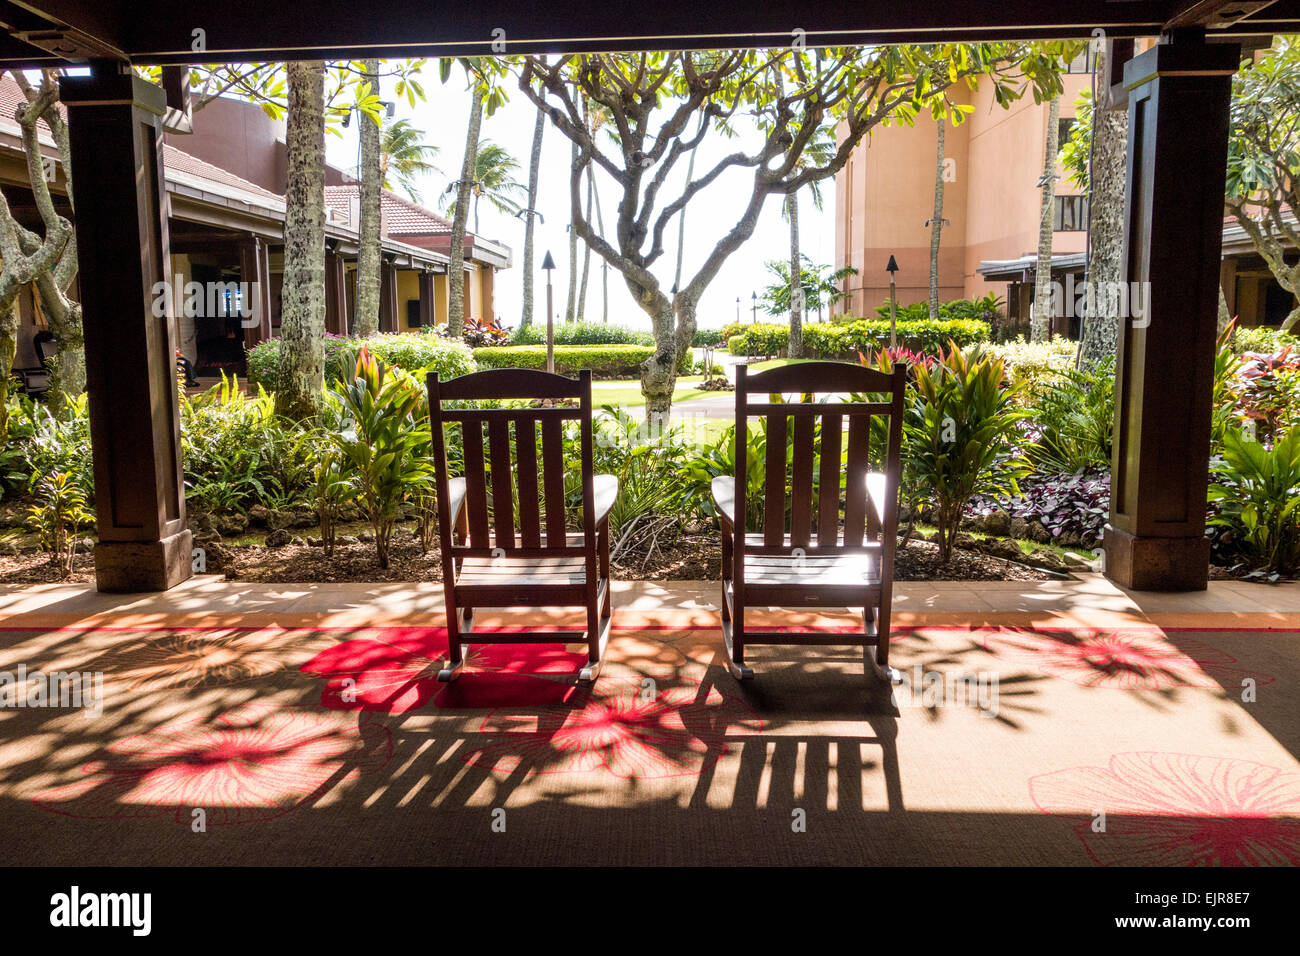 Empty rocking chairs on hotel porch Stock Photo